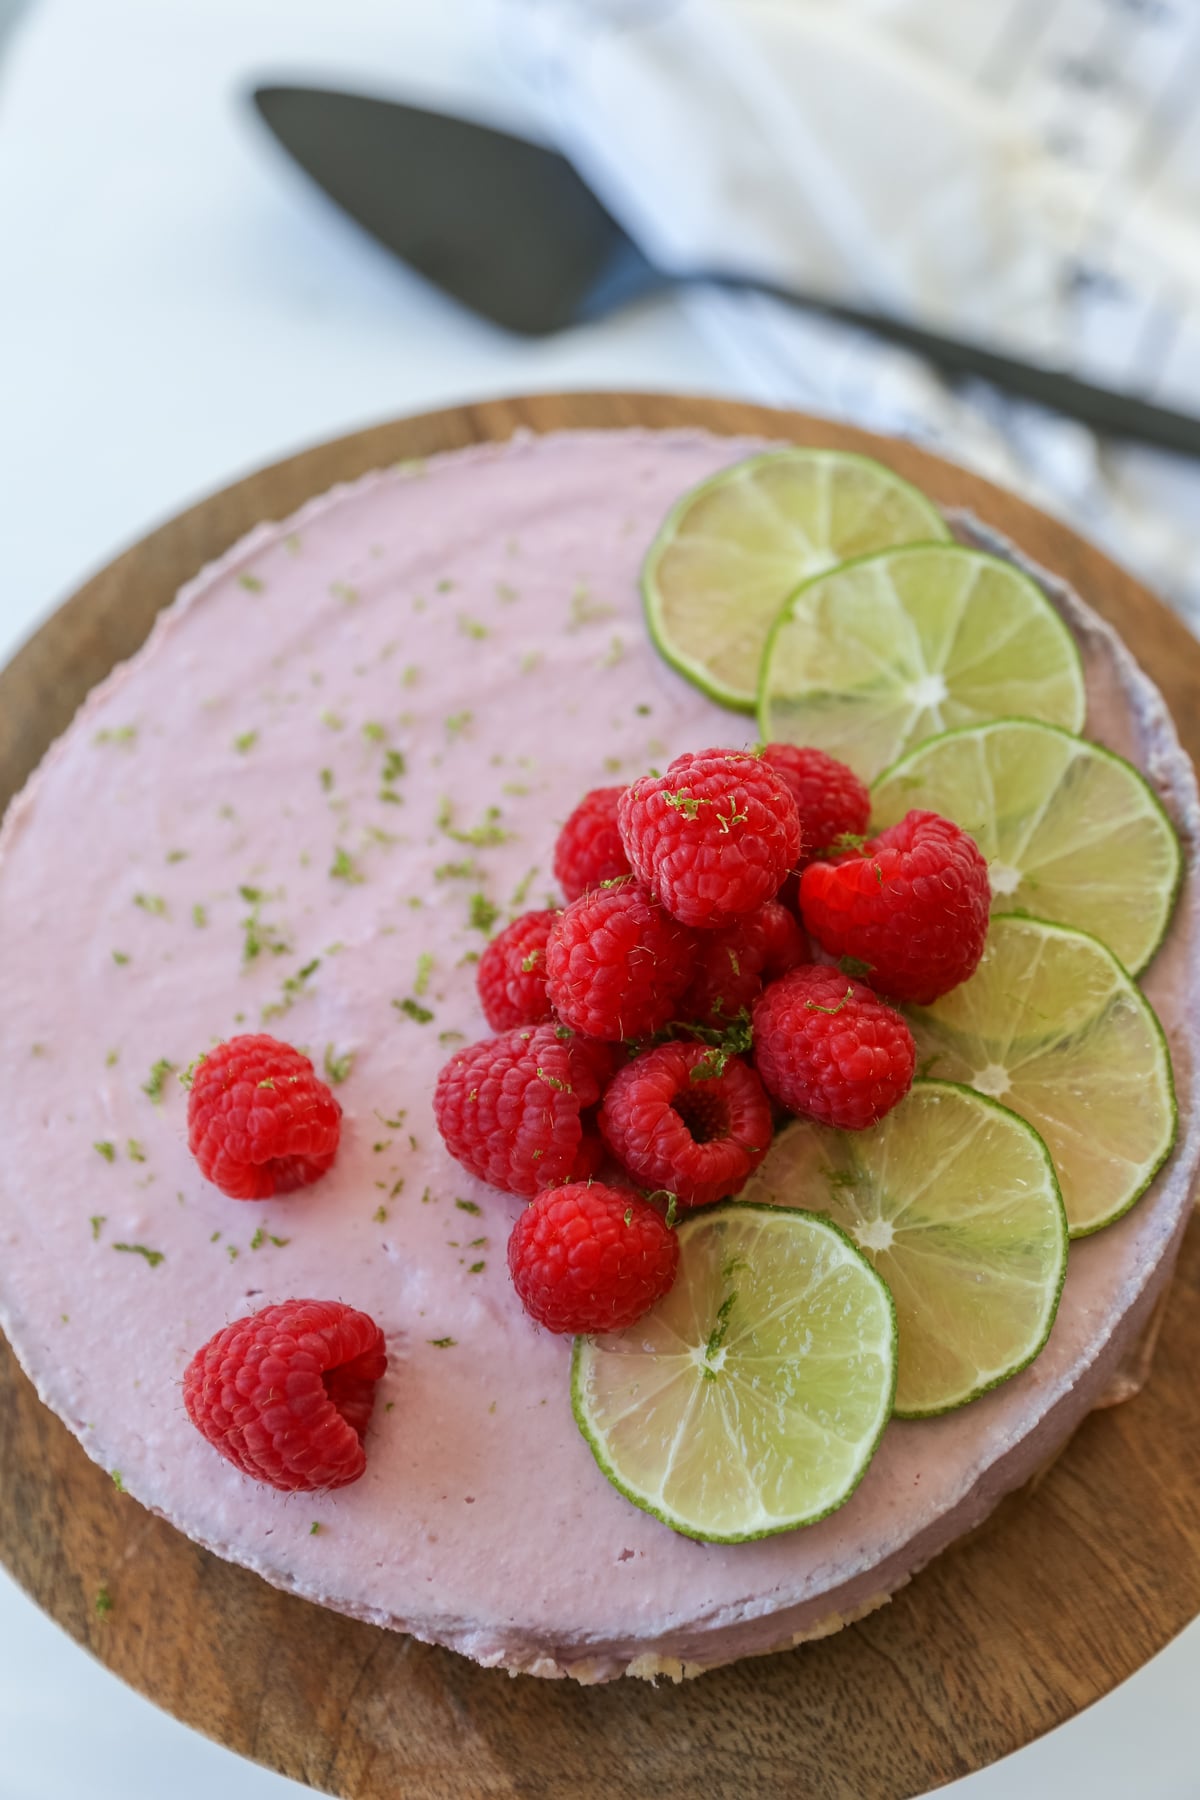 A raspberry cheesecake decorated with lime slices and whole raspberries on a wooden cake stand.